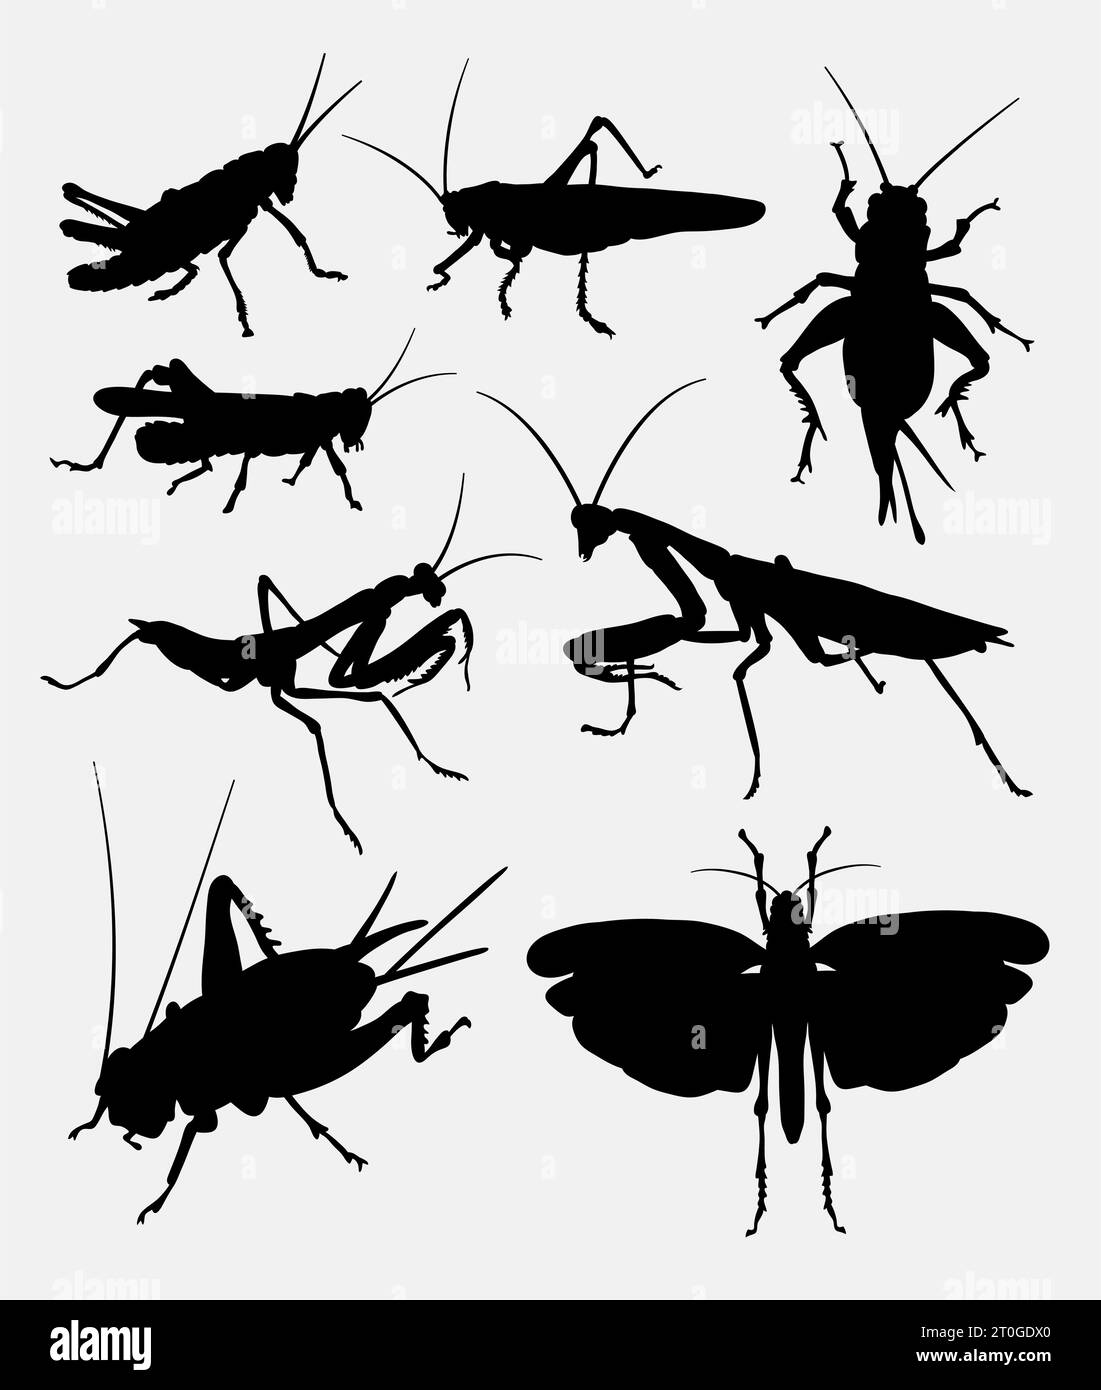 grasshopper and cricket insect animal silhouette Stock Vector